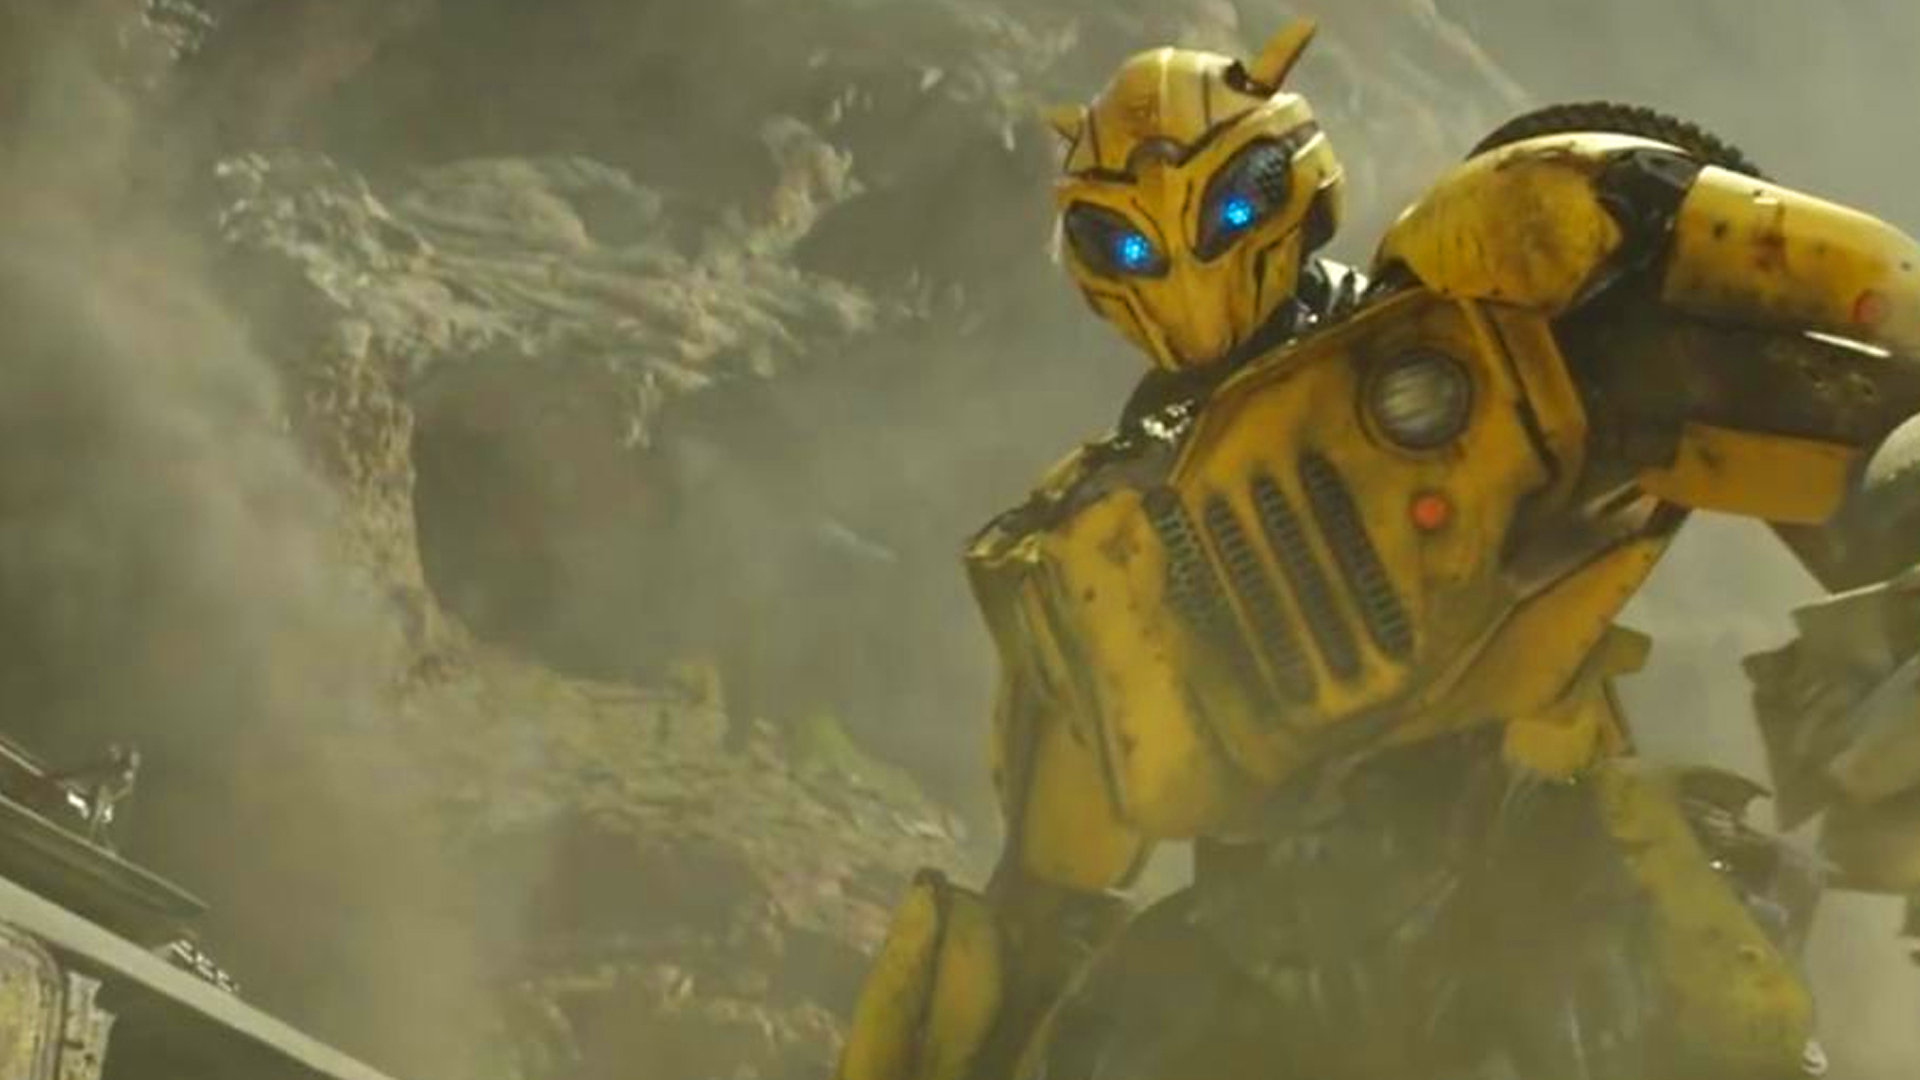 bumblebee review on the new trasnformers film starring john cena in our world first exclusive spoiler talk intro